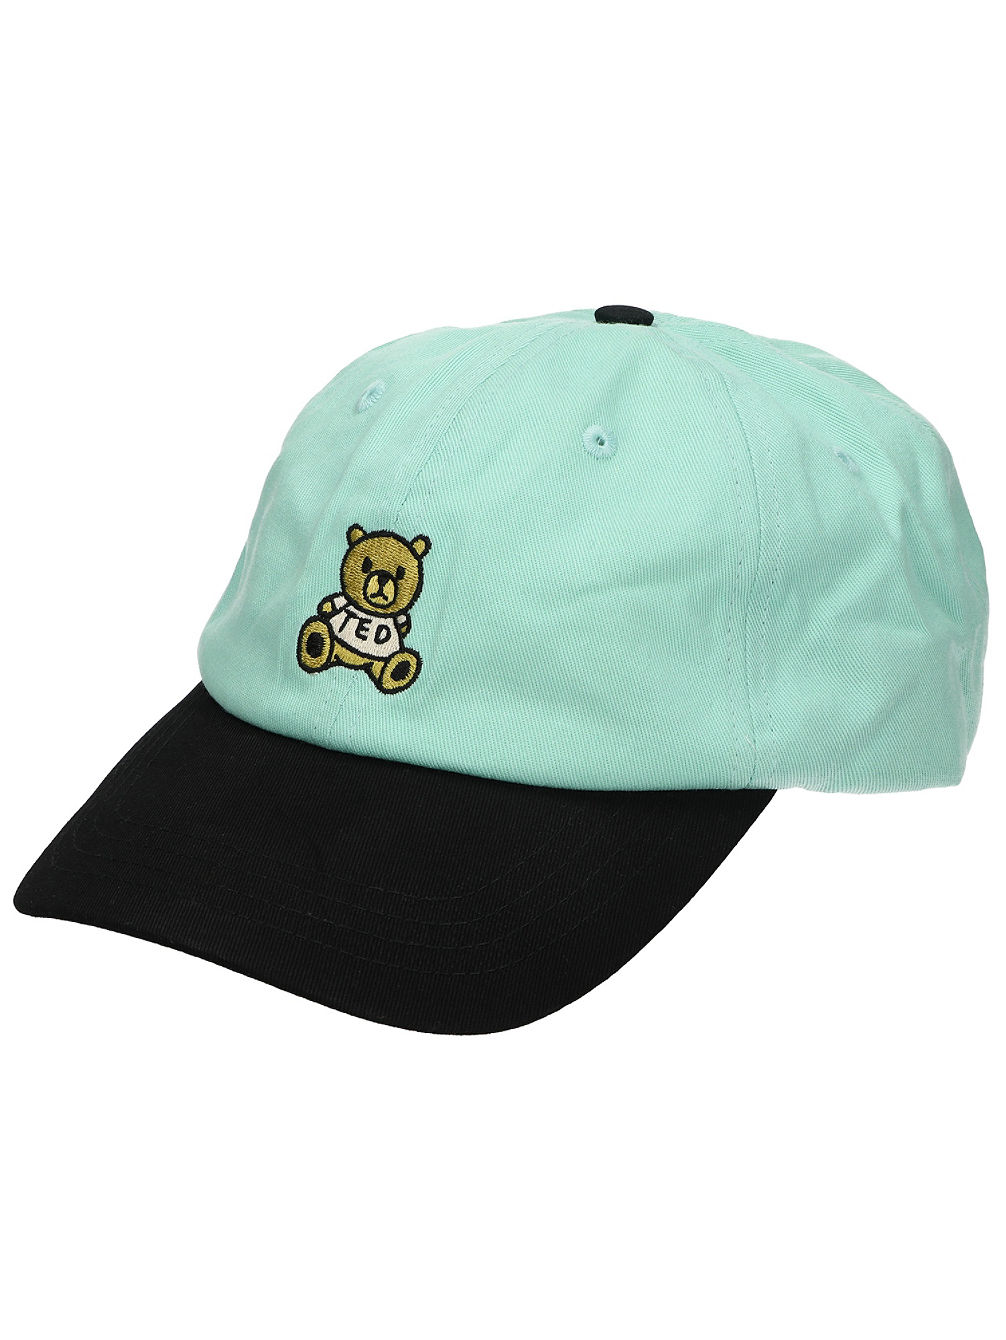 New Bear Dad Casquette